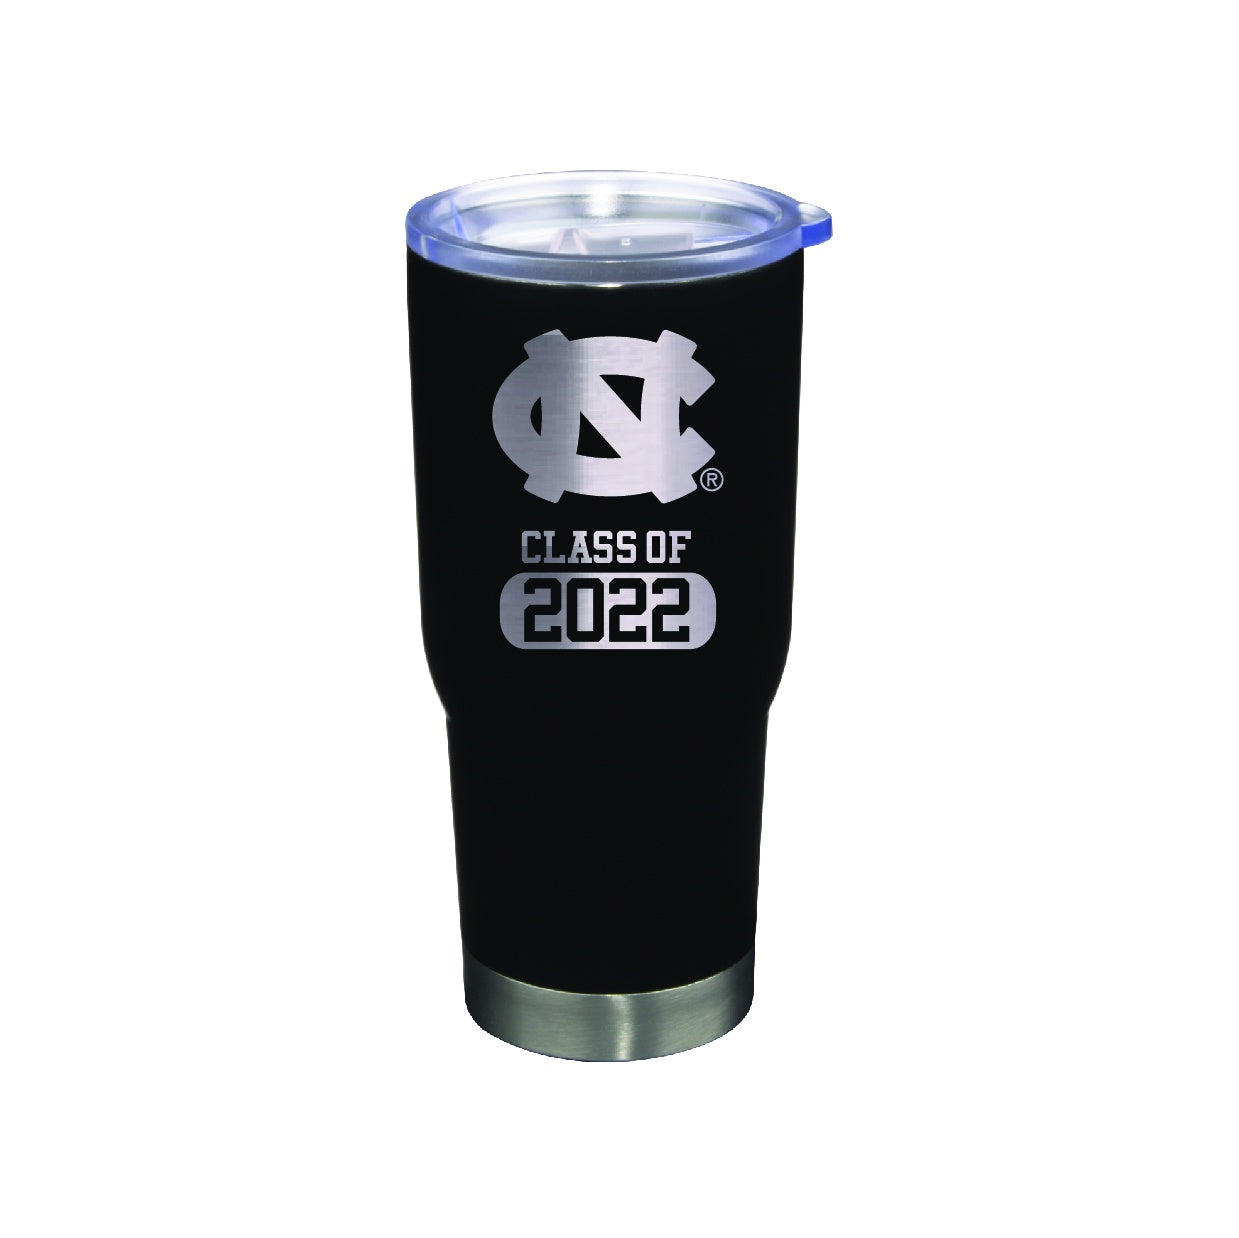 UNC Class of 2022 Stainless Steel Tumbler in Black 22 oz